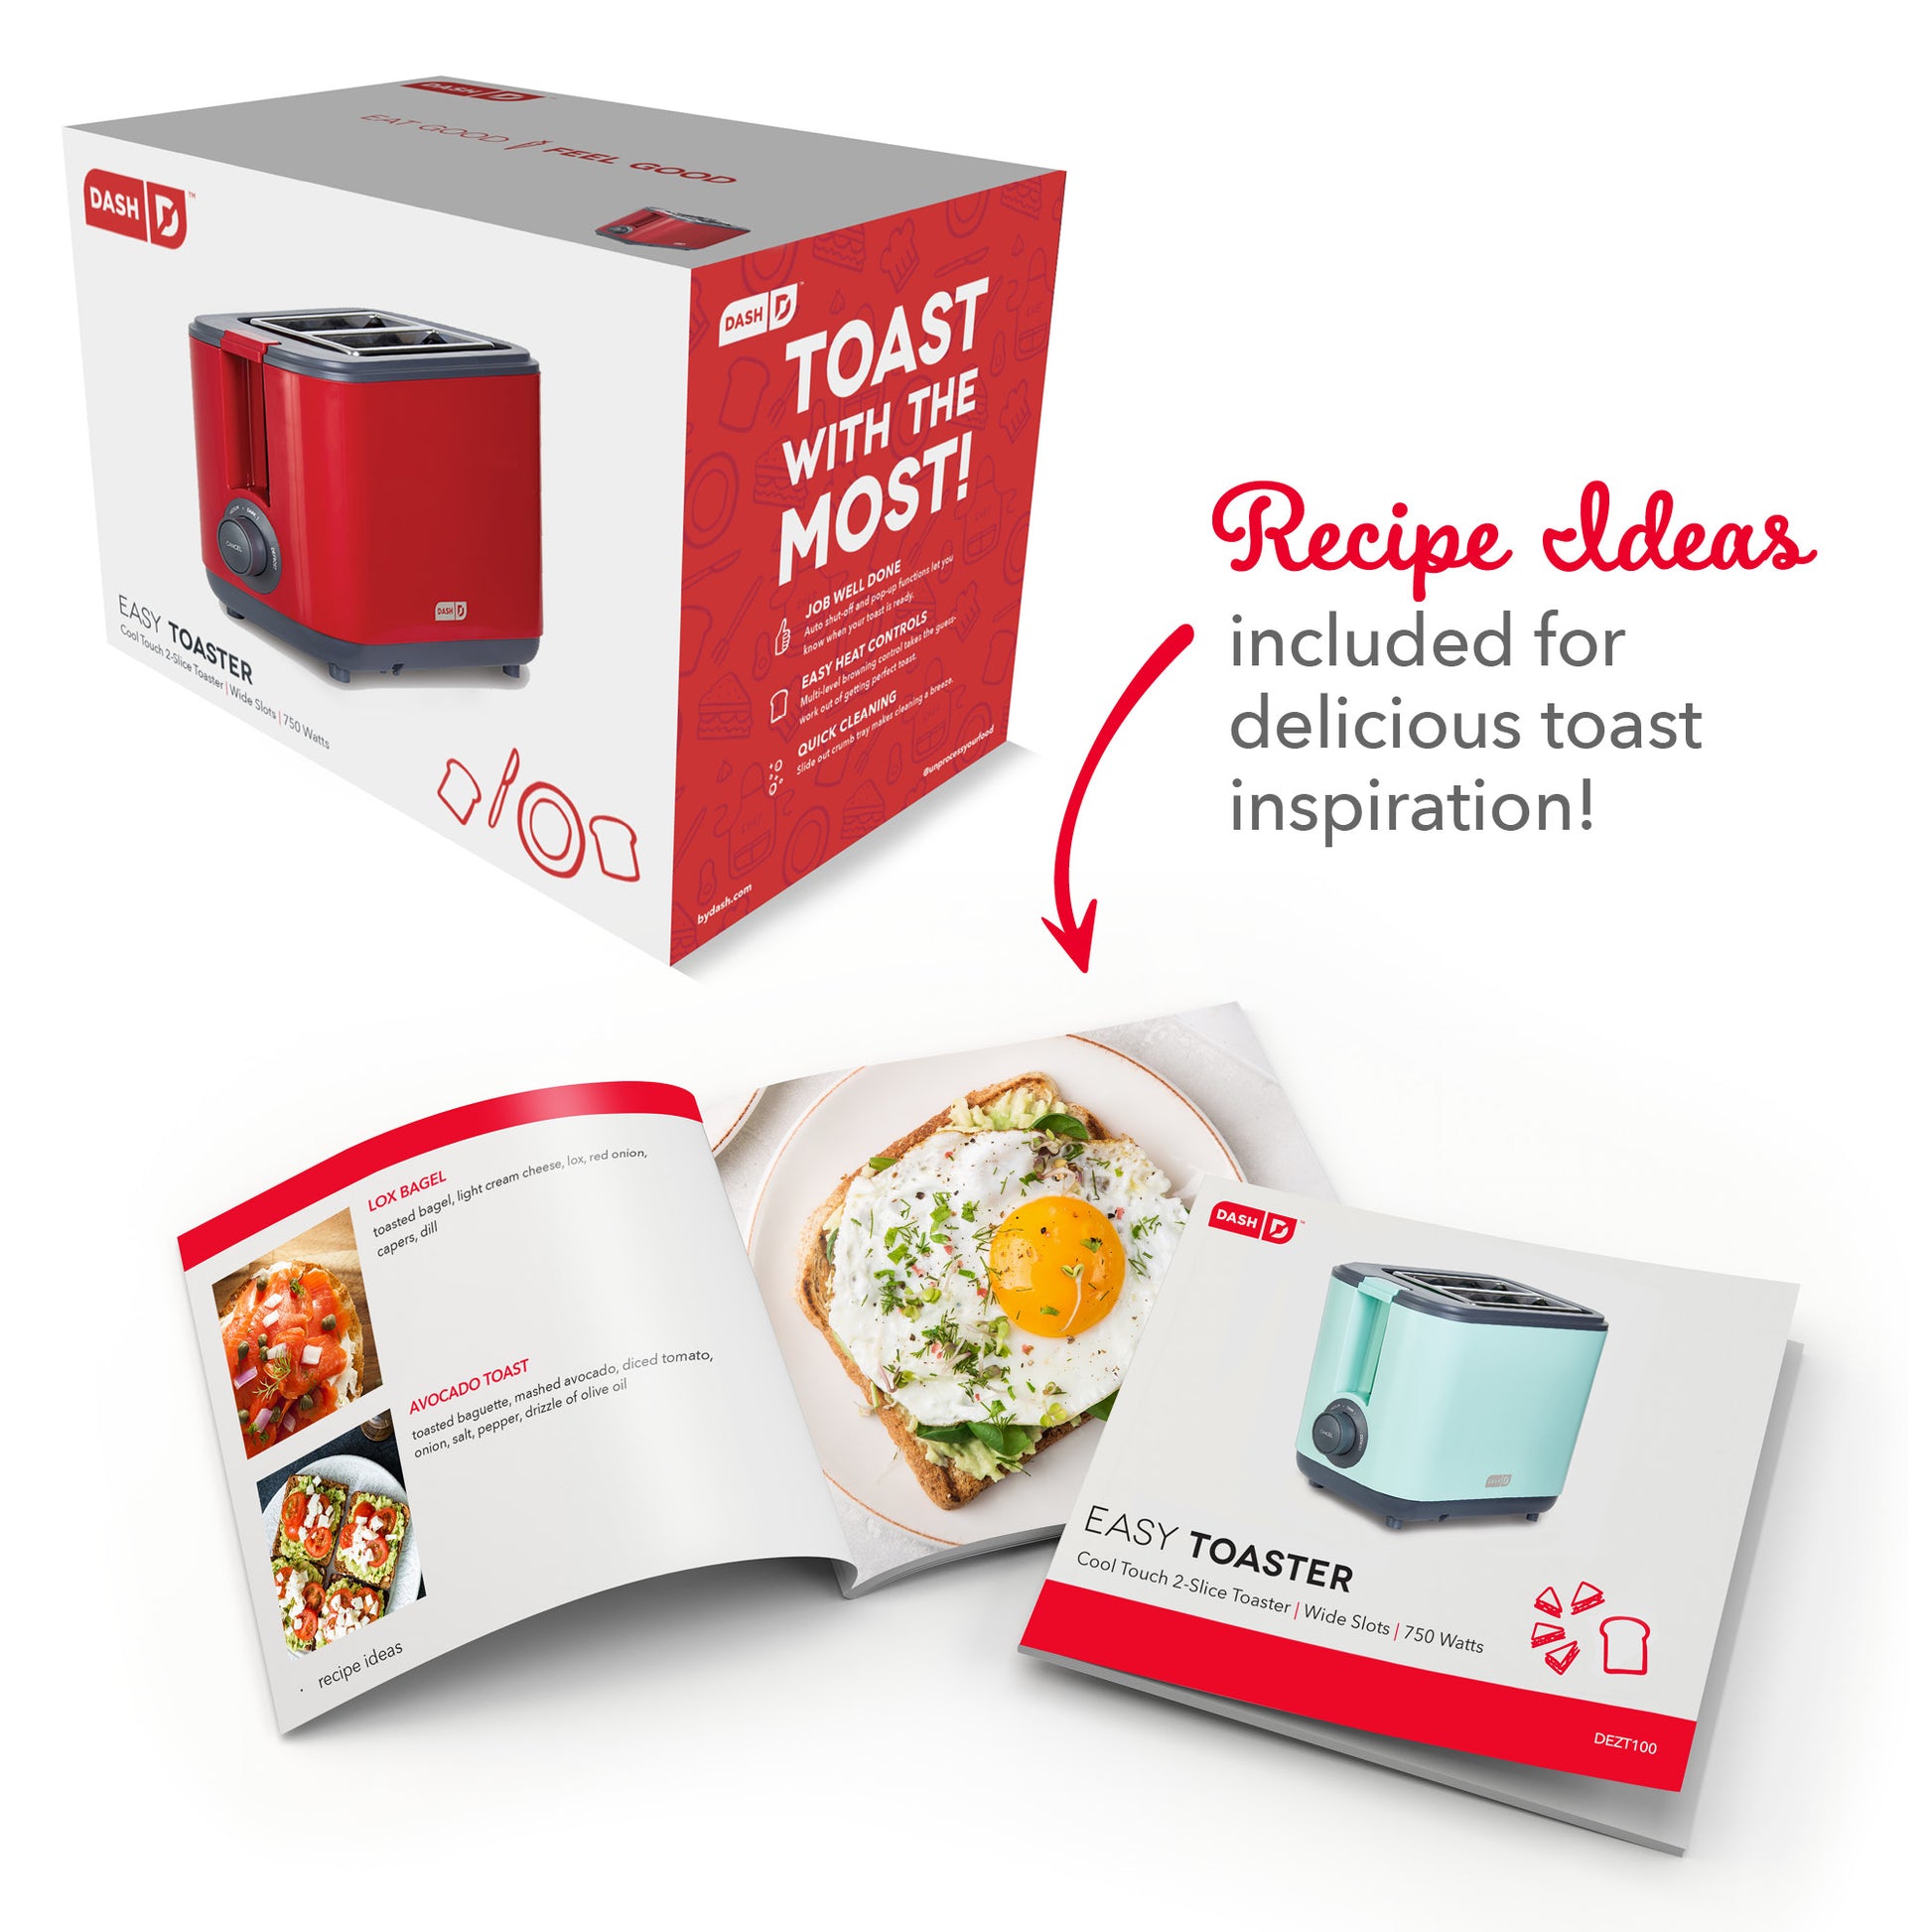 Easy Toaster Toasters and Ovens Dash   